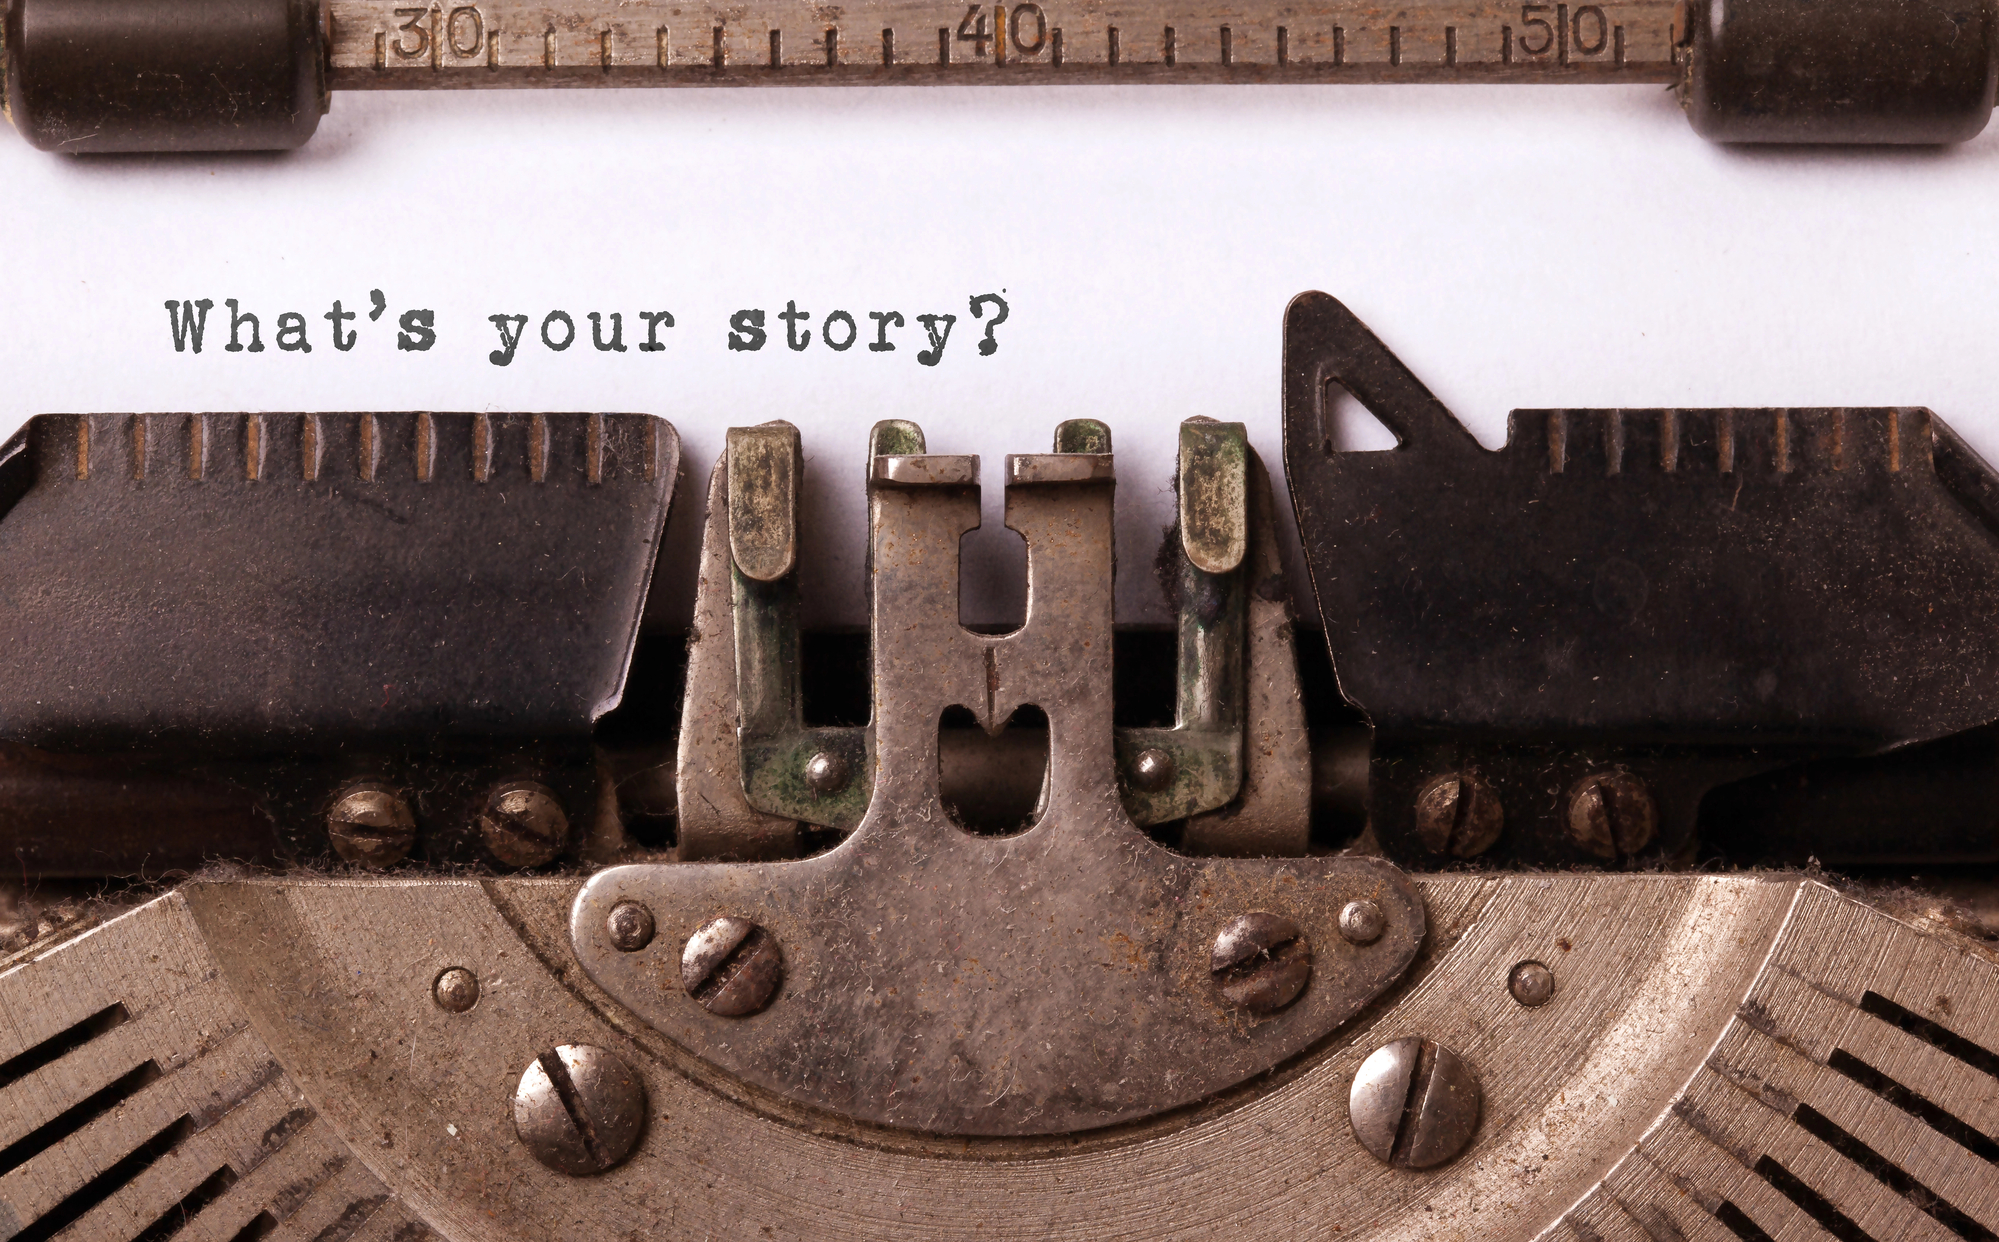 Text on a page in an old-fashioned typewriter saying "What's your story?"